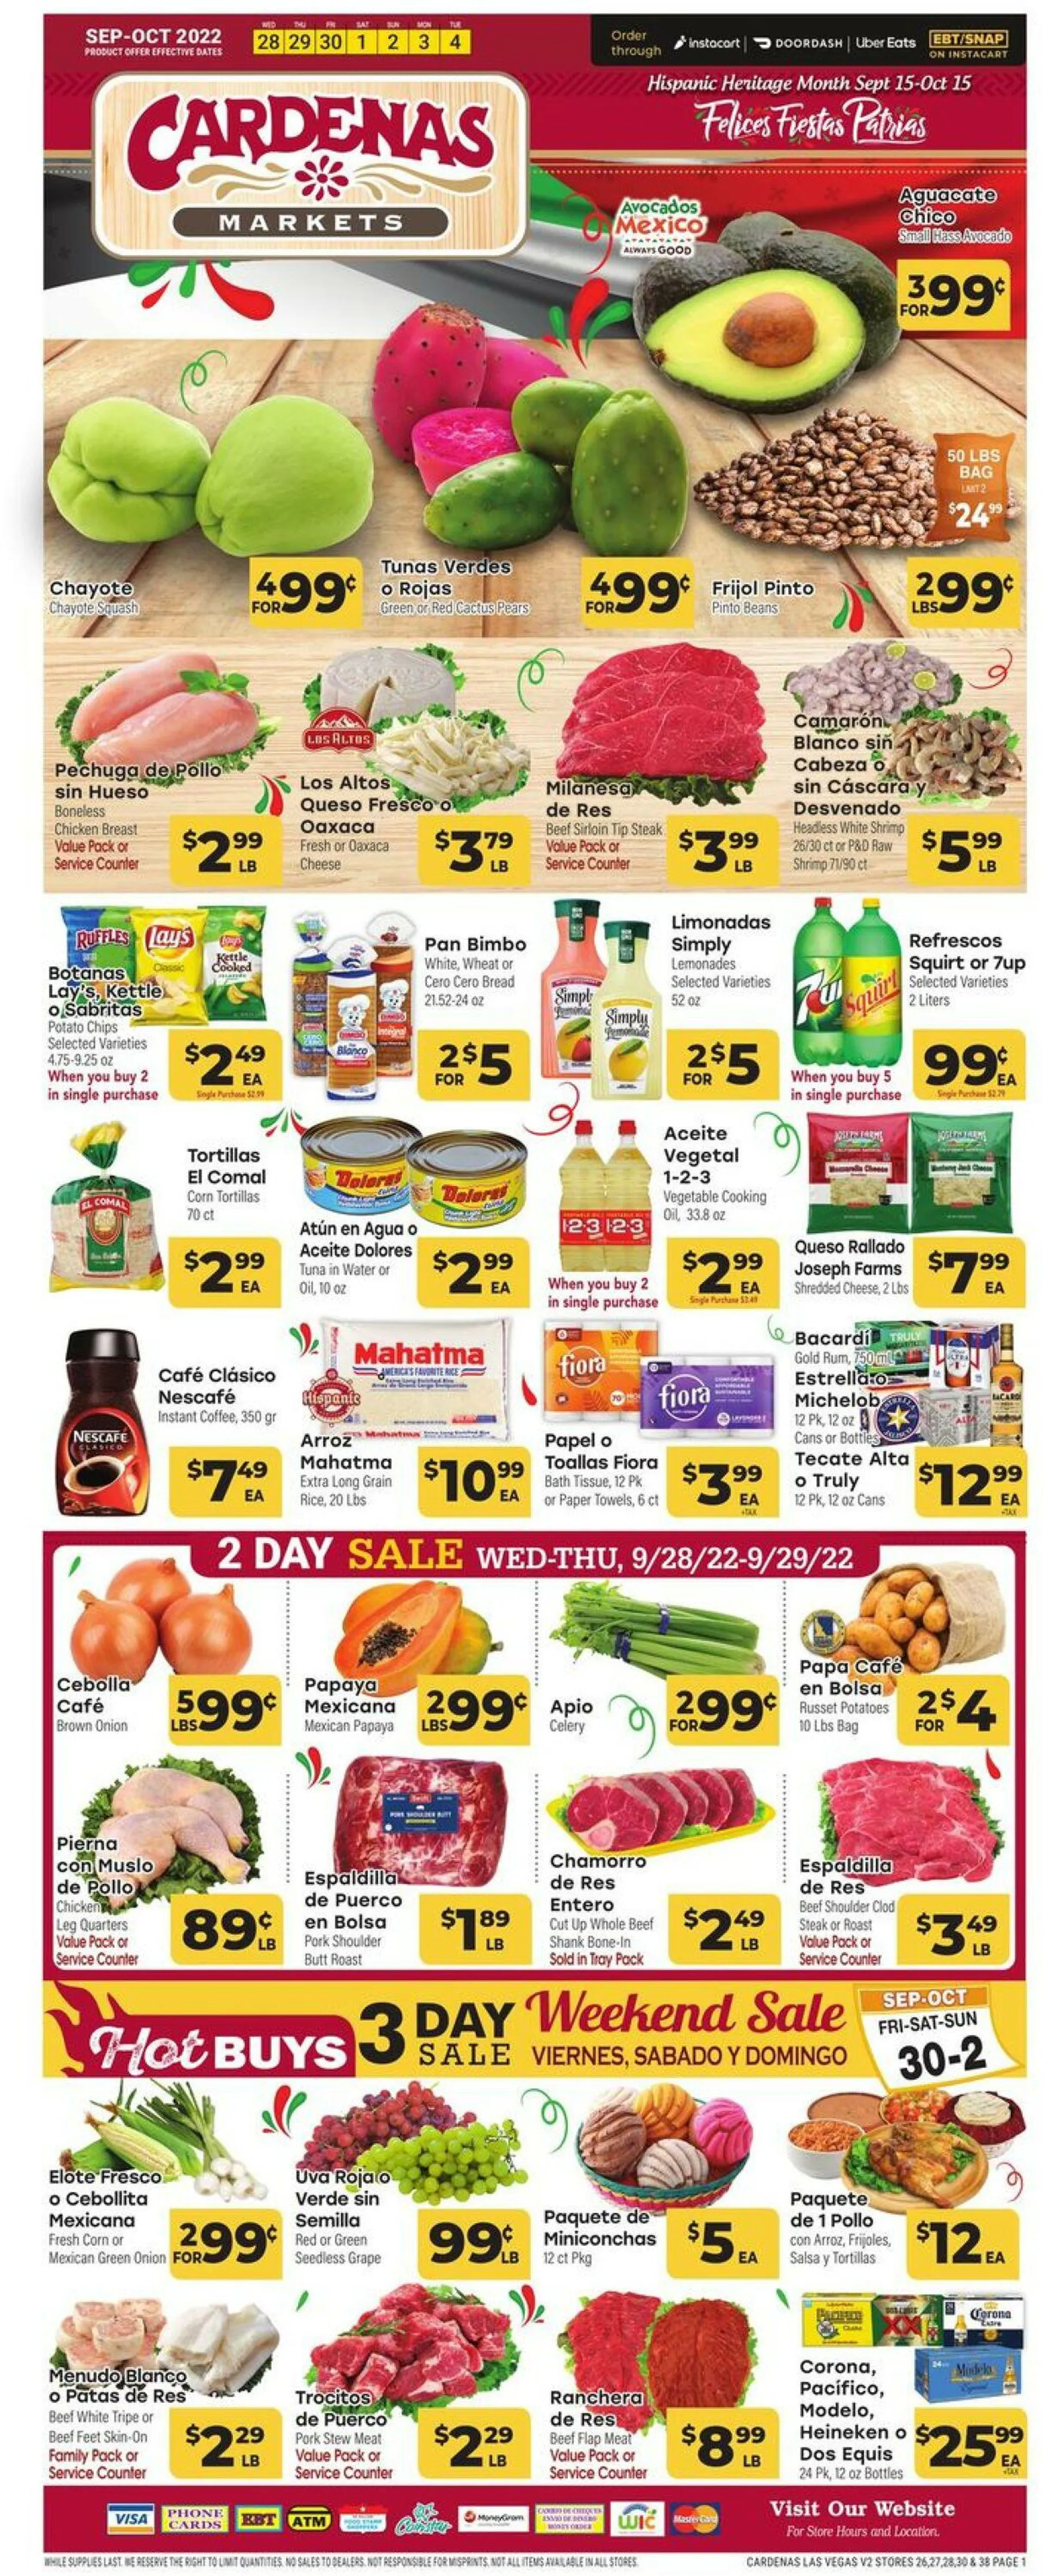 Cardenas Current weekly ad - 1